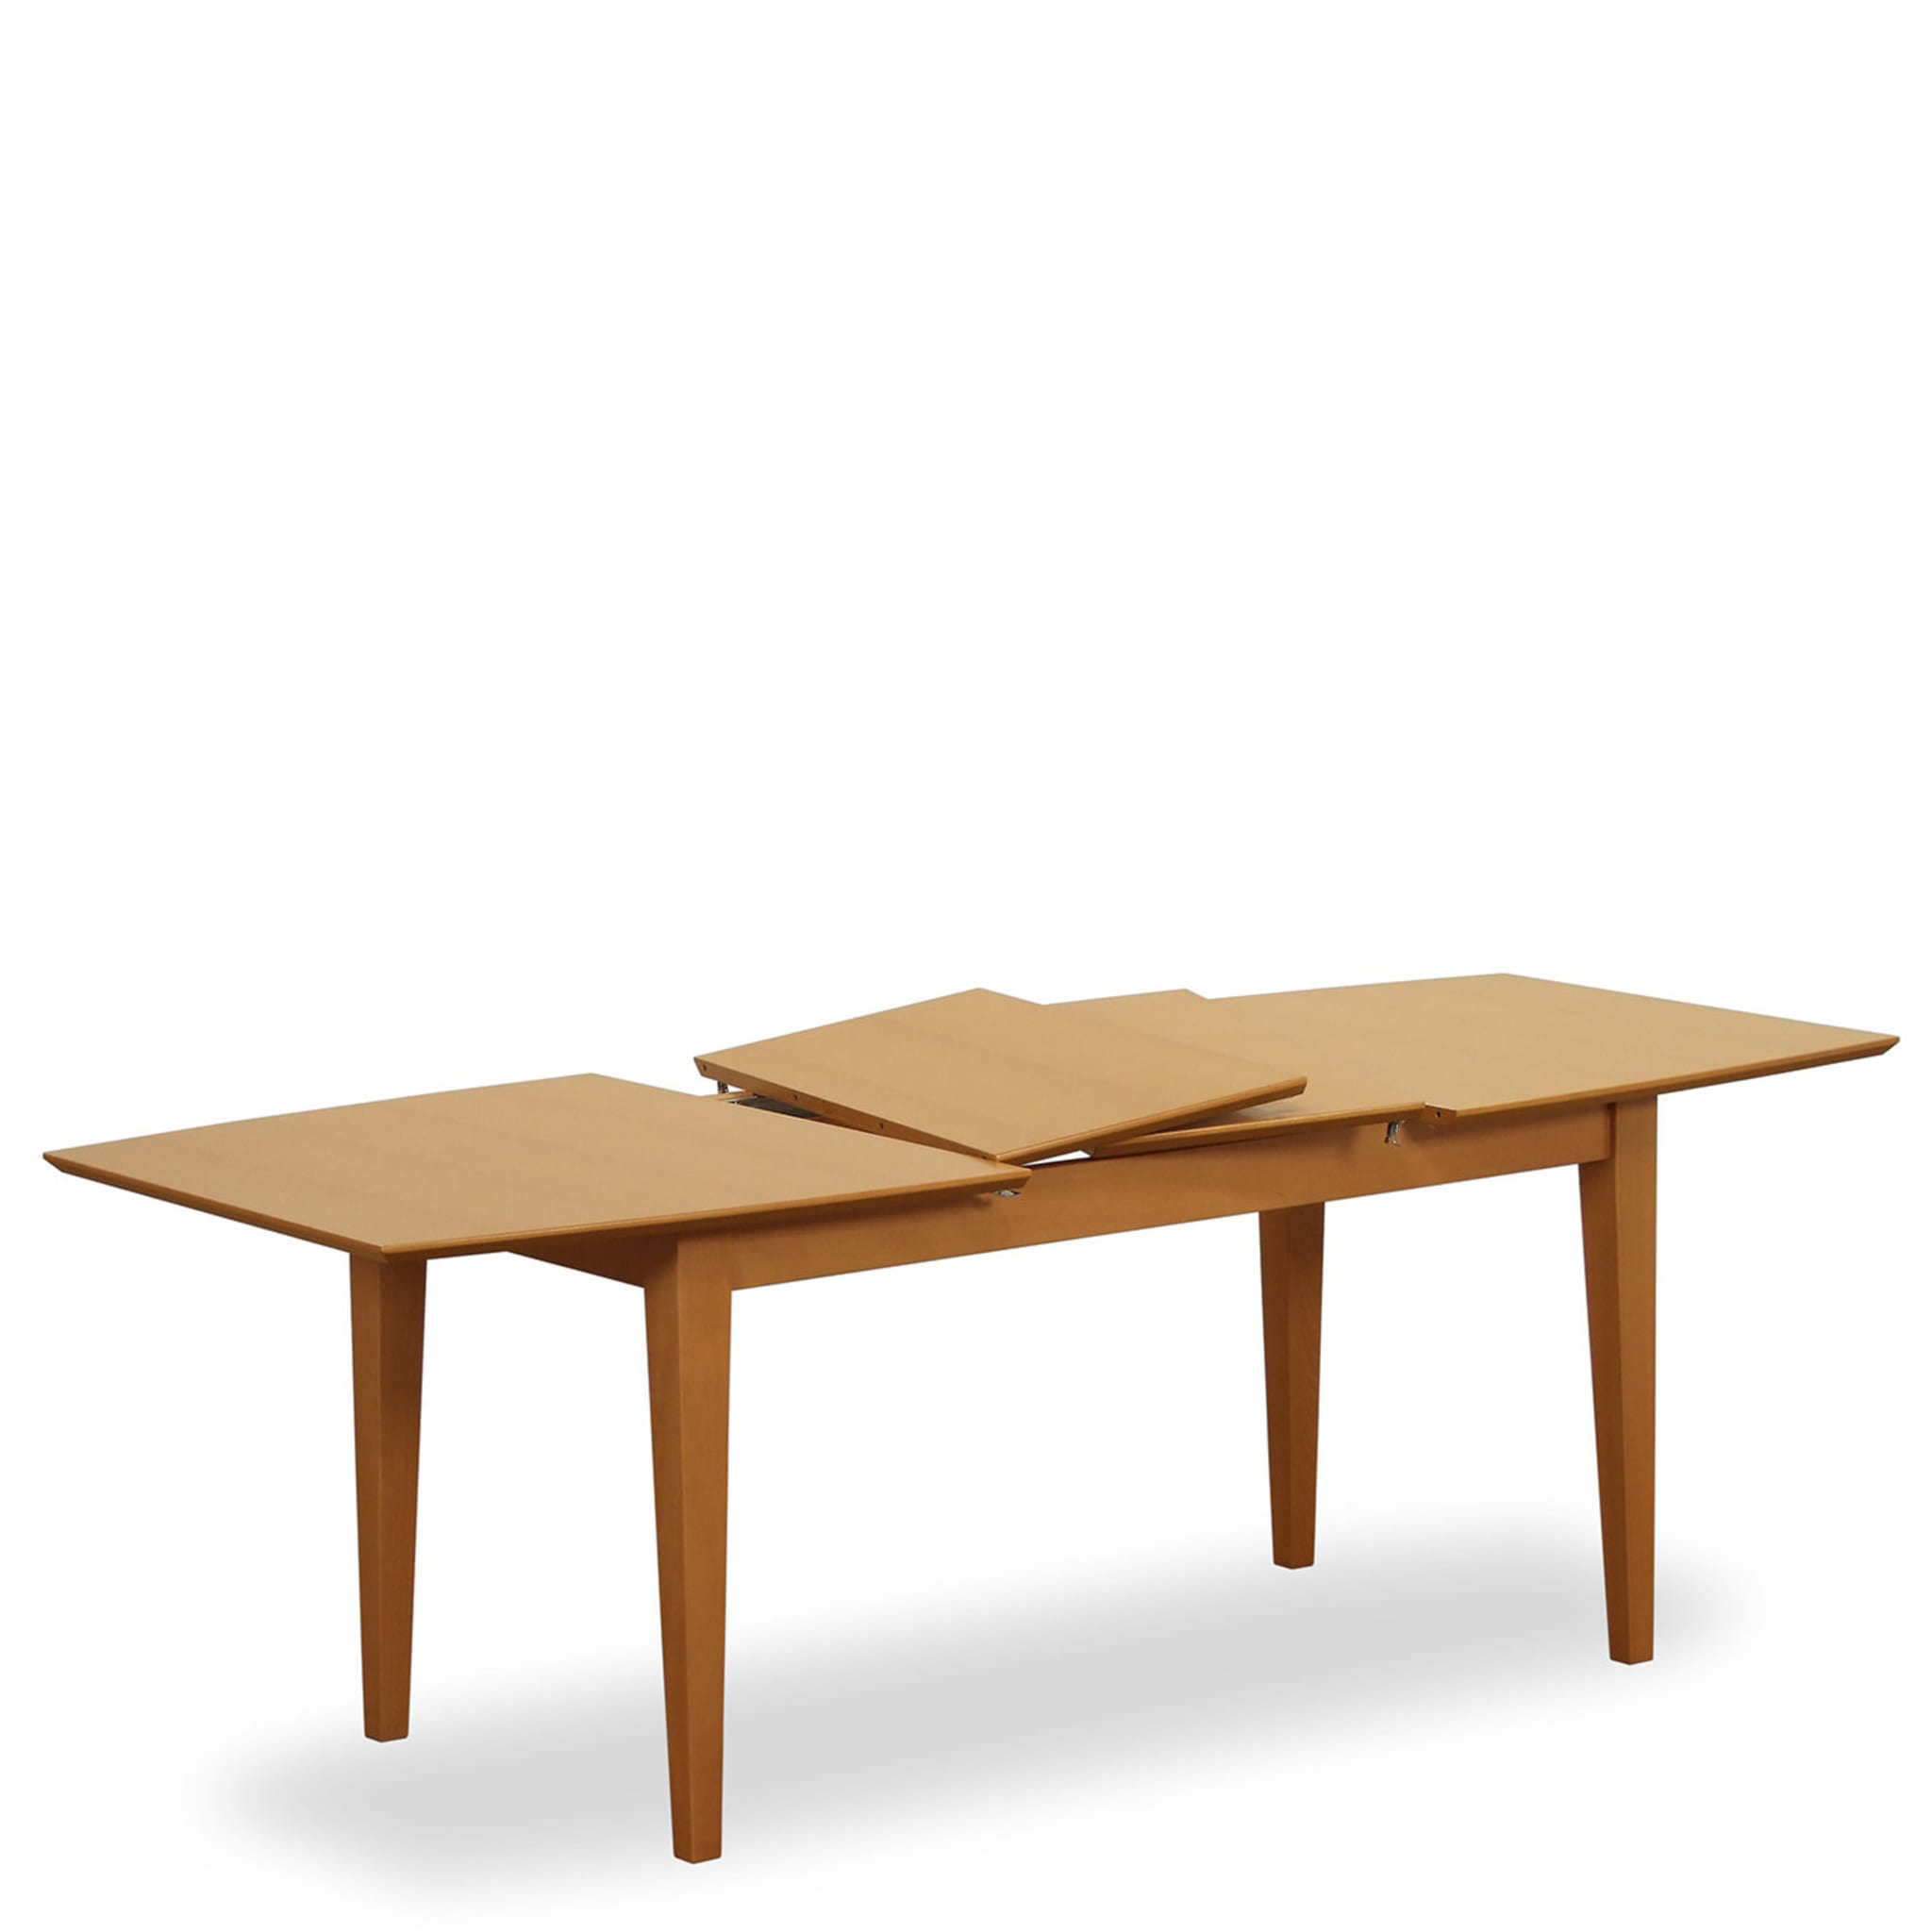 640/35 Extendable Dining Table - Alternative view 1